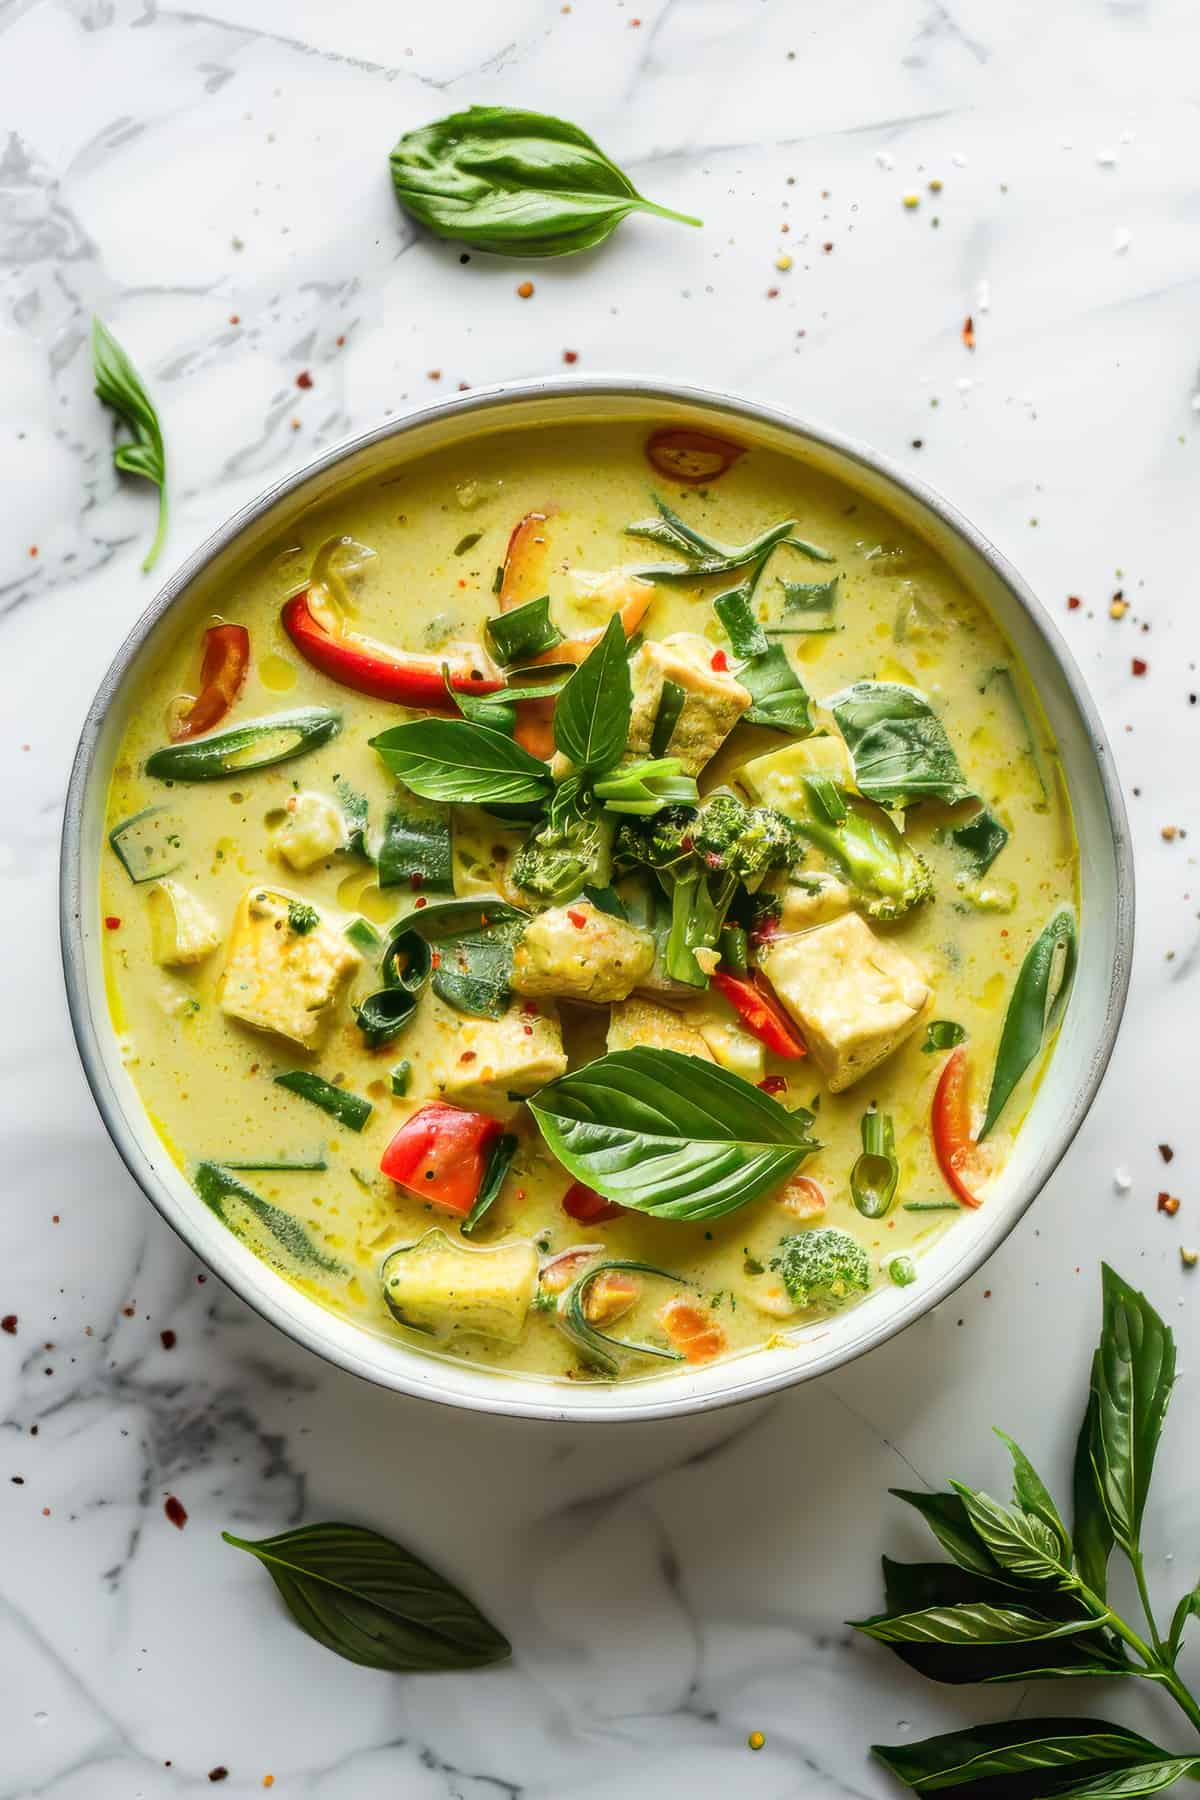 Vegetarian Thai green curry with tofu and herbs in a white bowl.